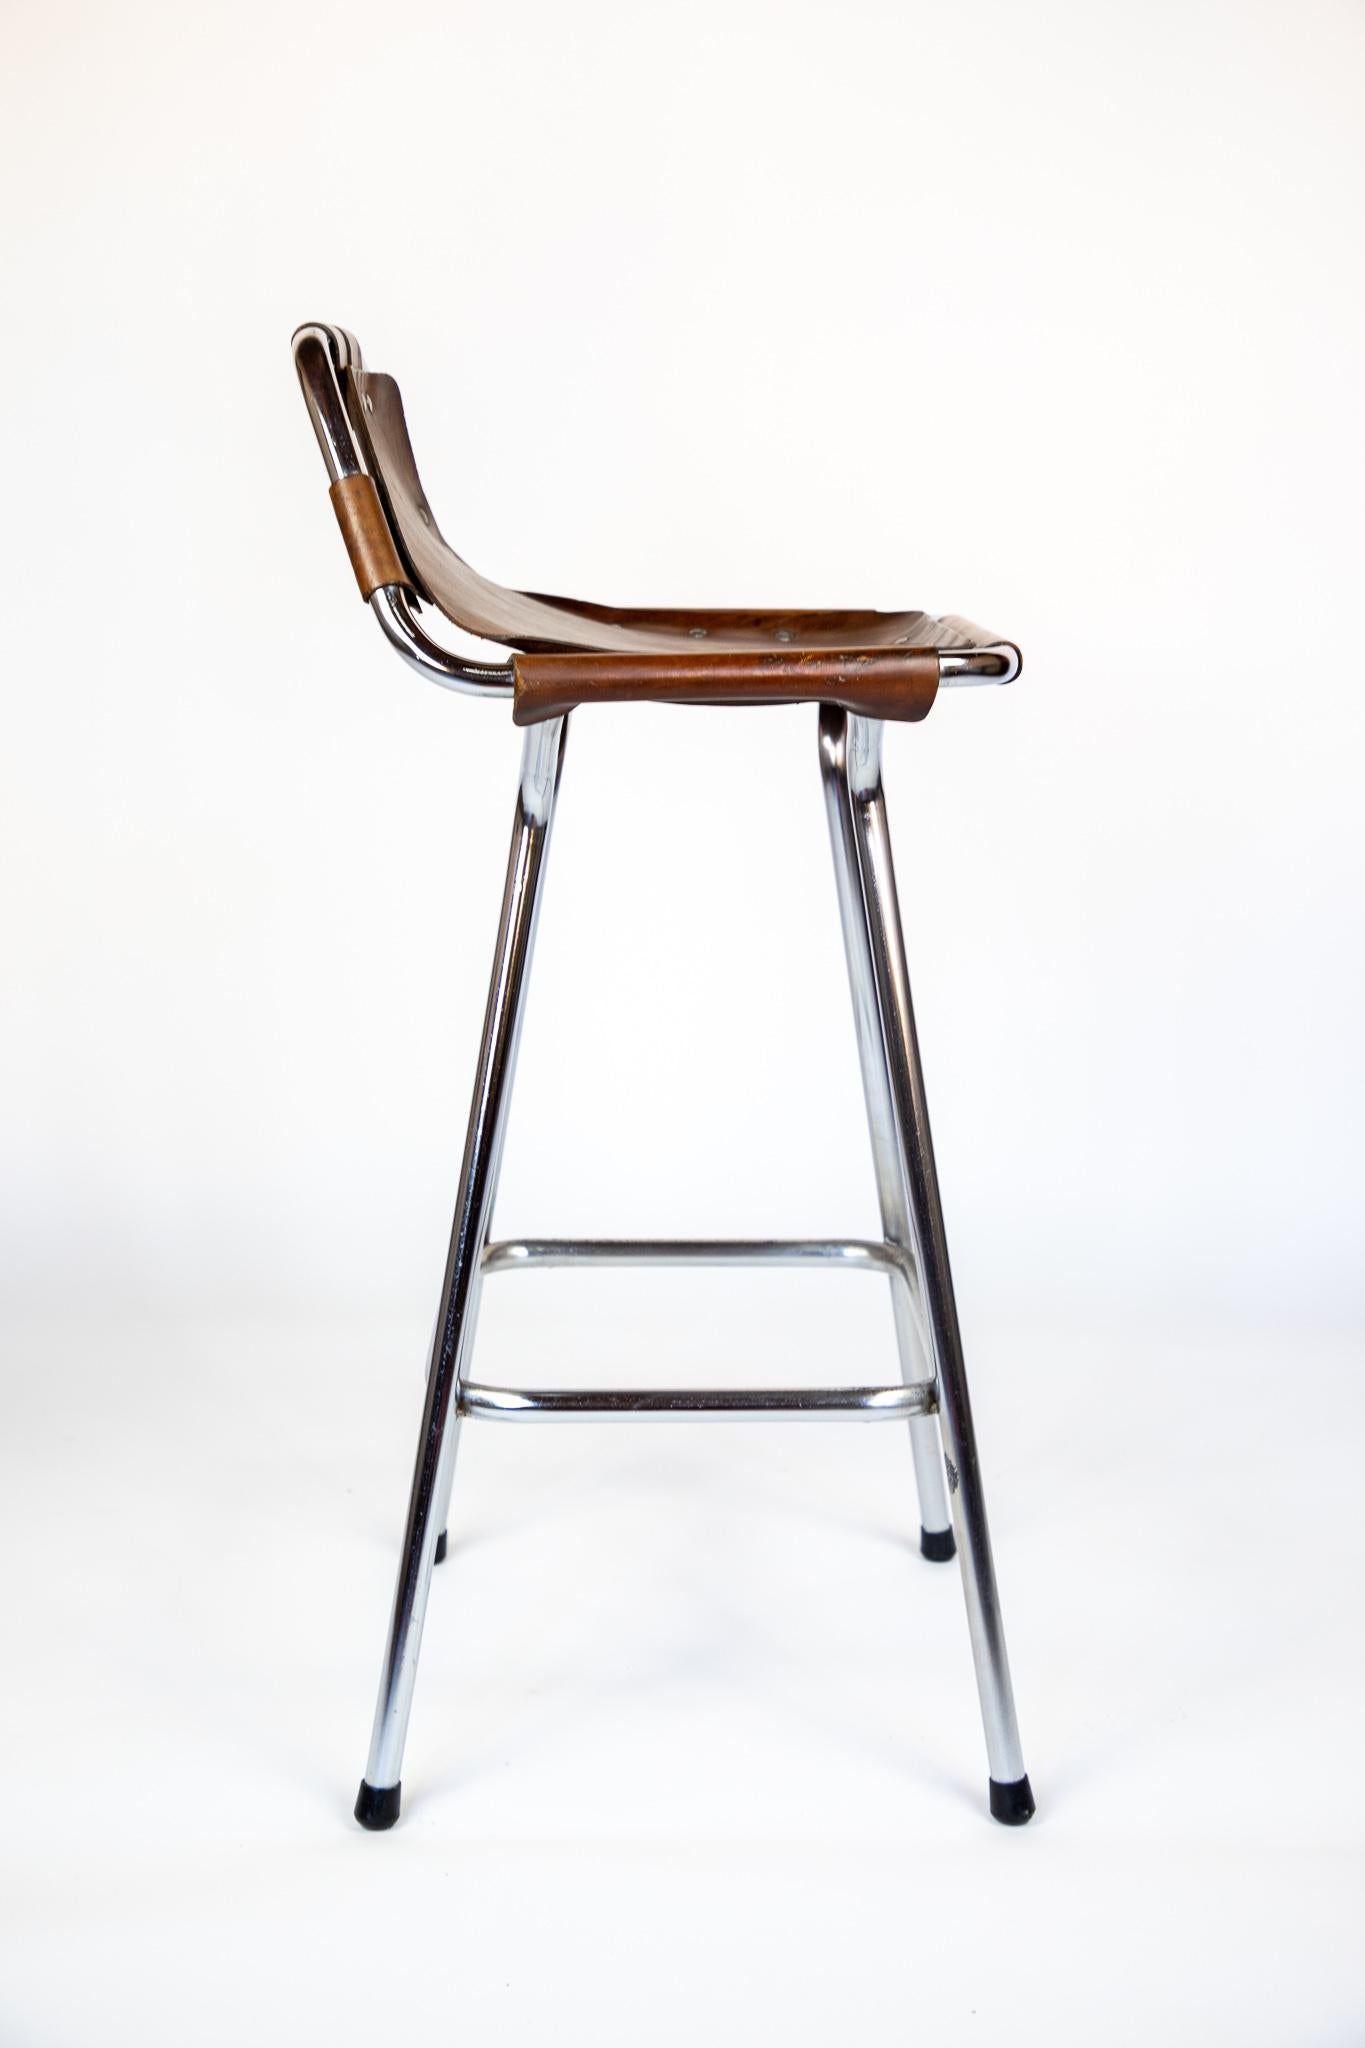 Mid-20th Century French Mid-Century Saddle Leather, Brown, Chrome Bar Stools, Perriand, 1960s